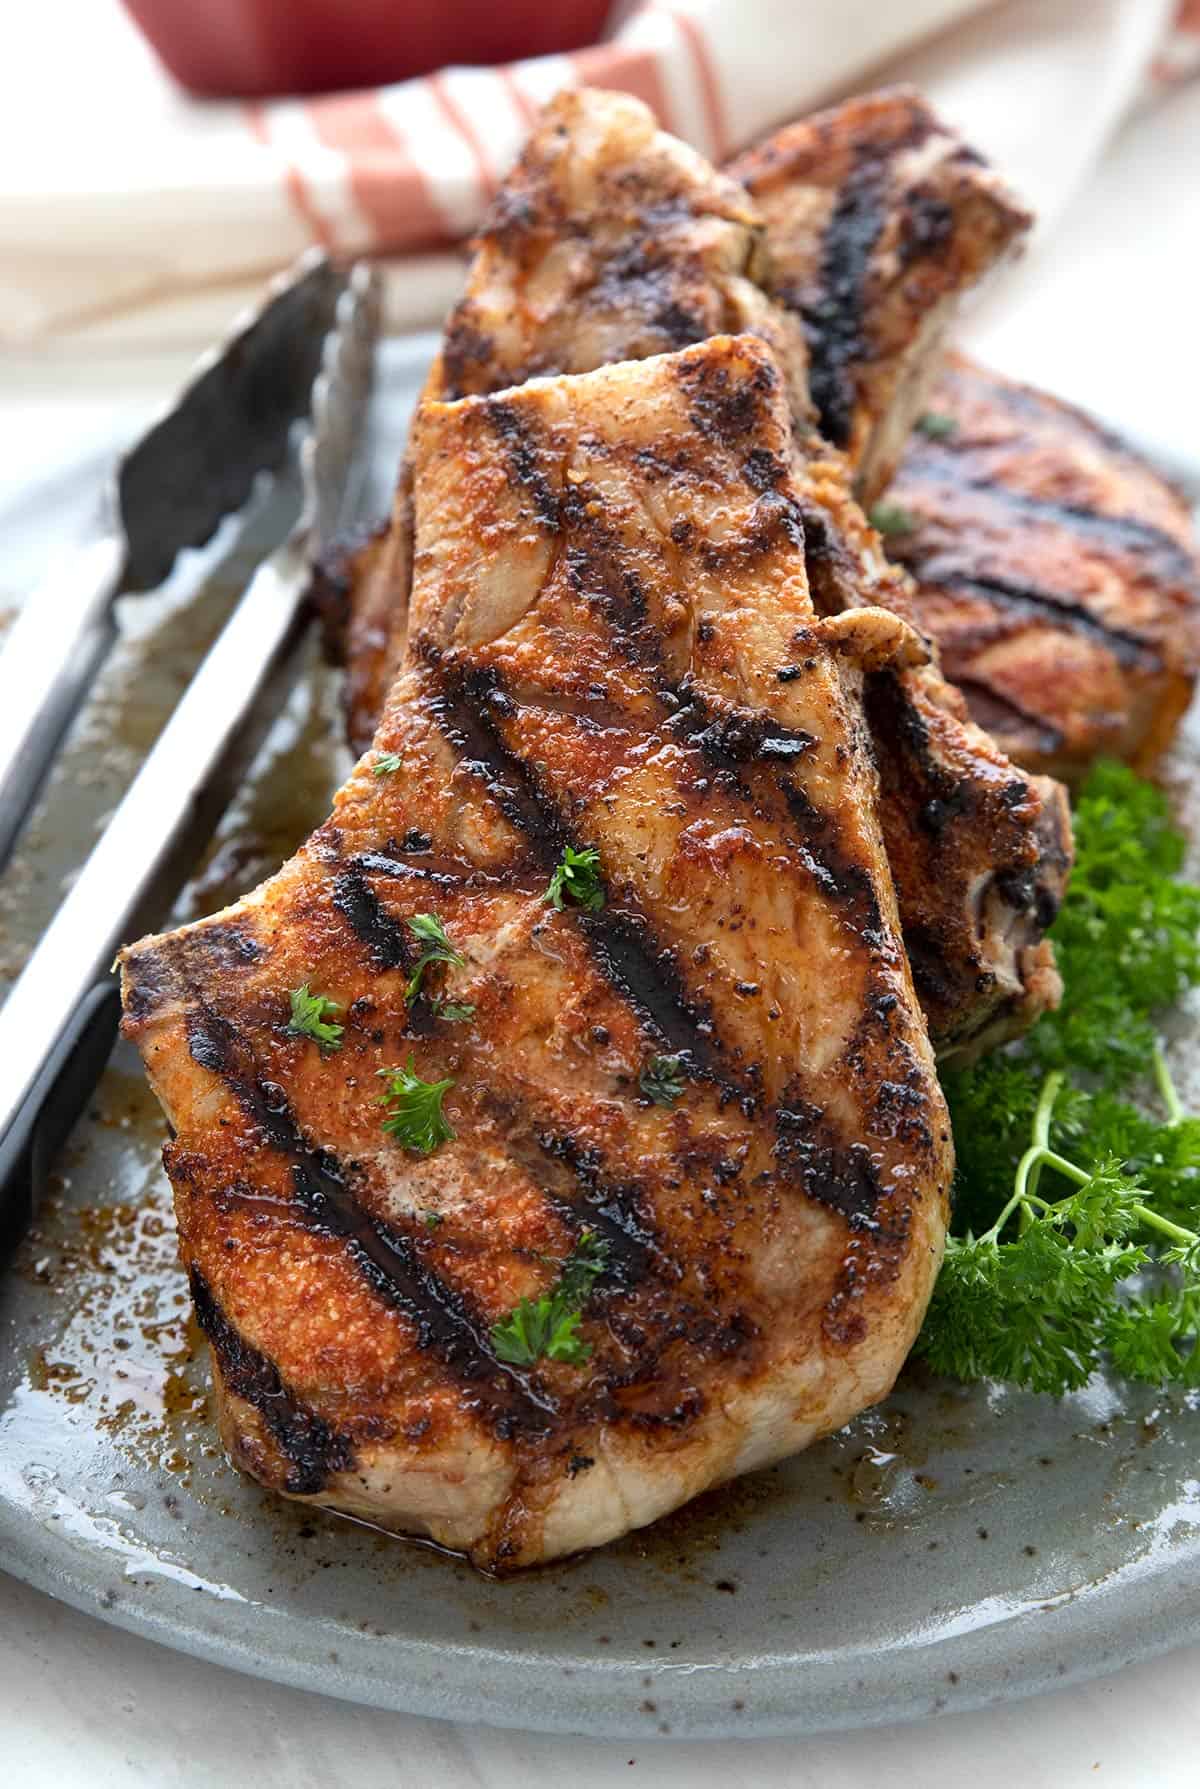 Grilled pork chops on a gray plate with sprigs of parsley and a pair of grilling tongs.